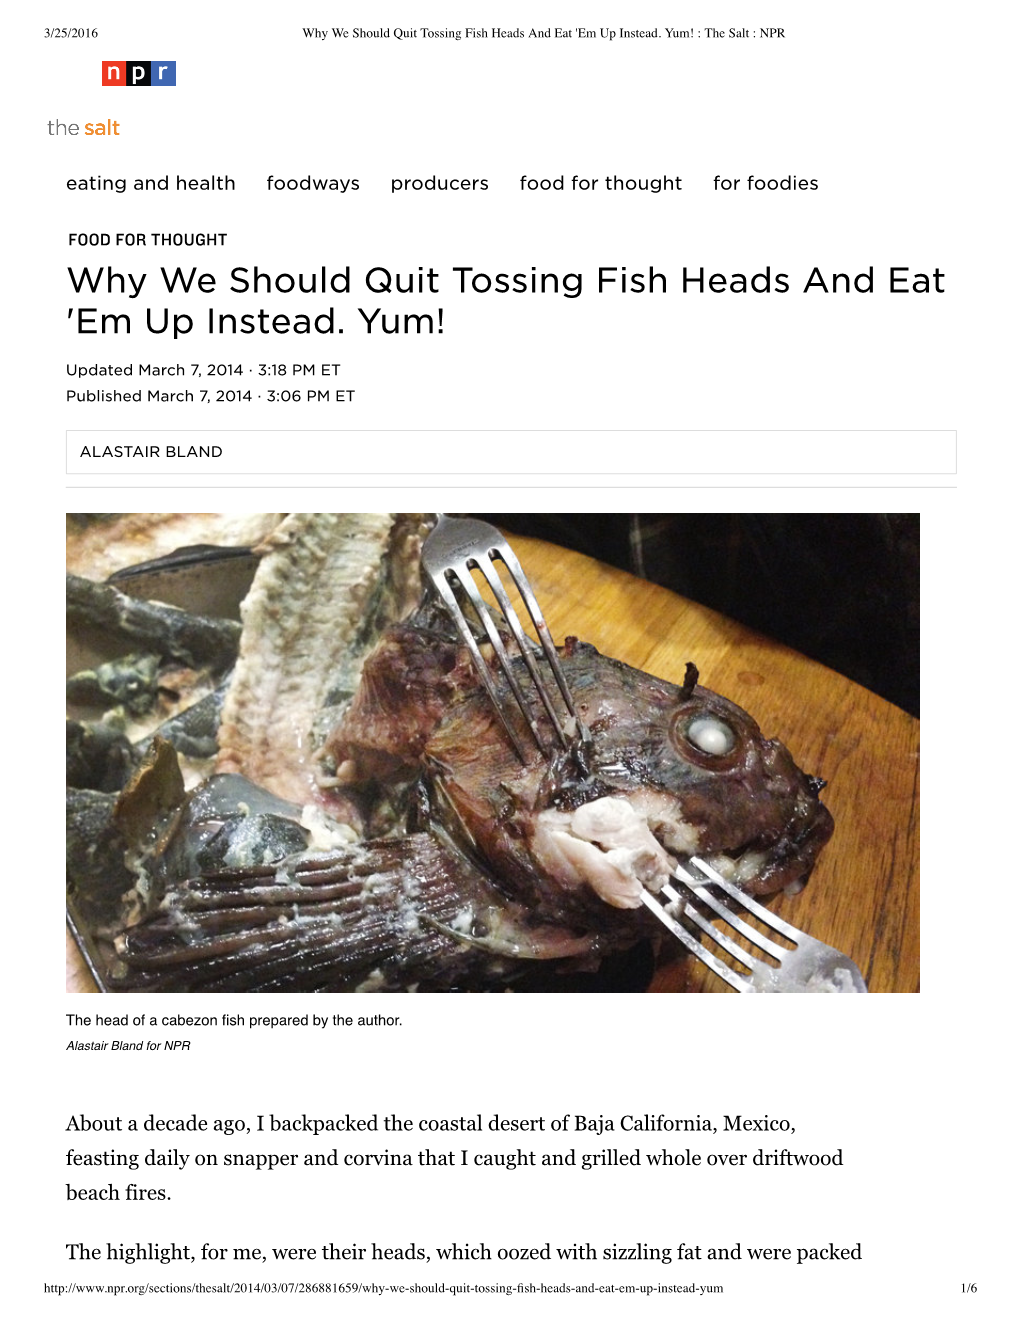 Why We Should Quit Tossing Fish Heads and Eat 'Em up Instead